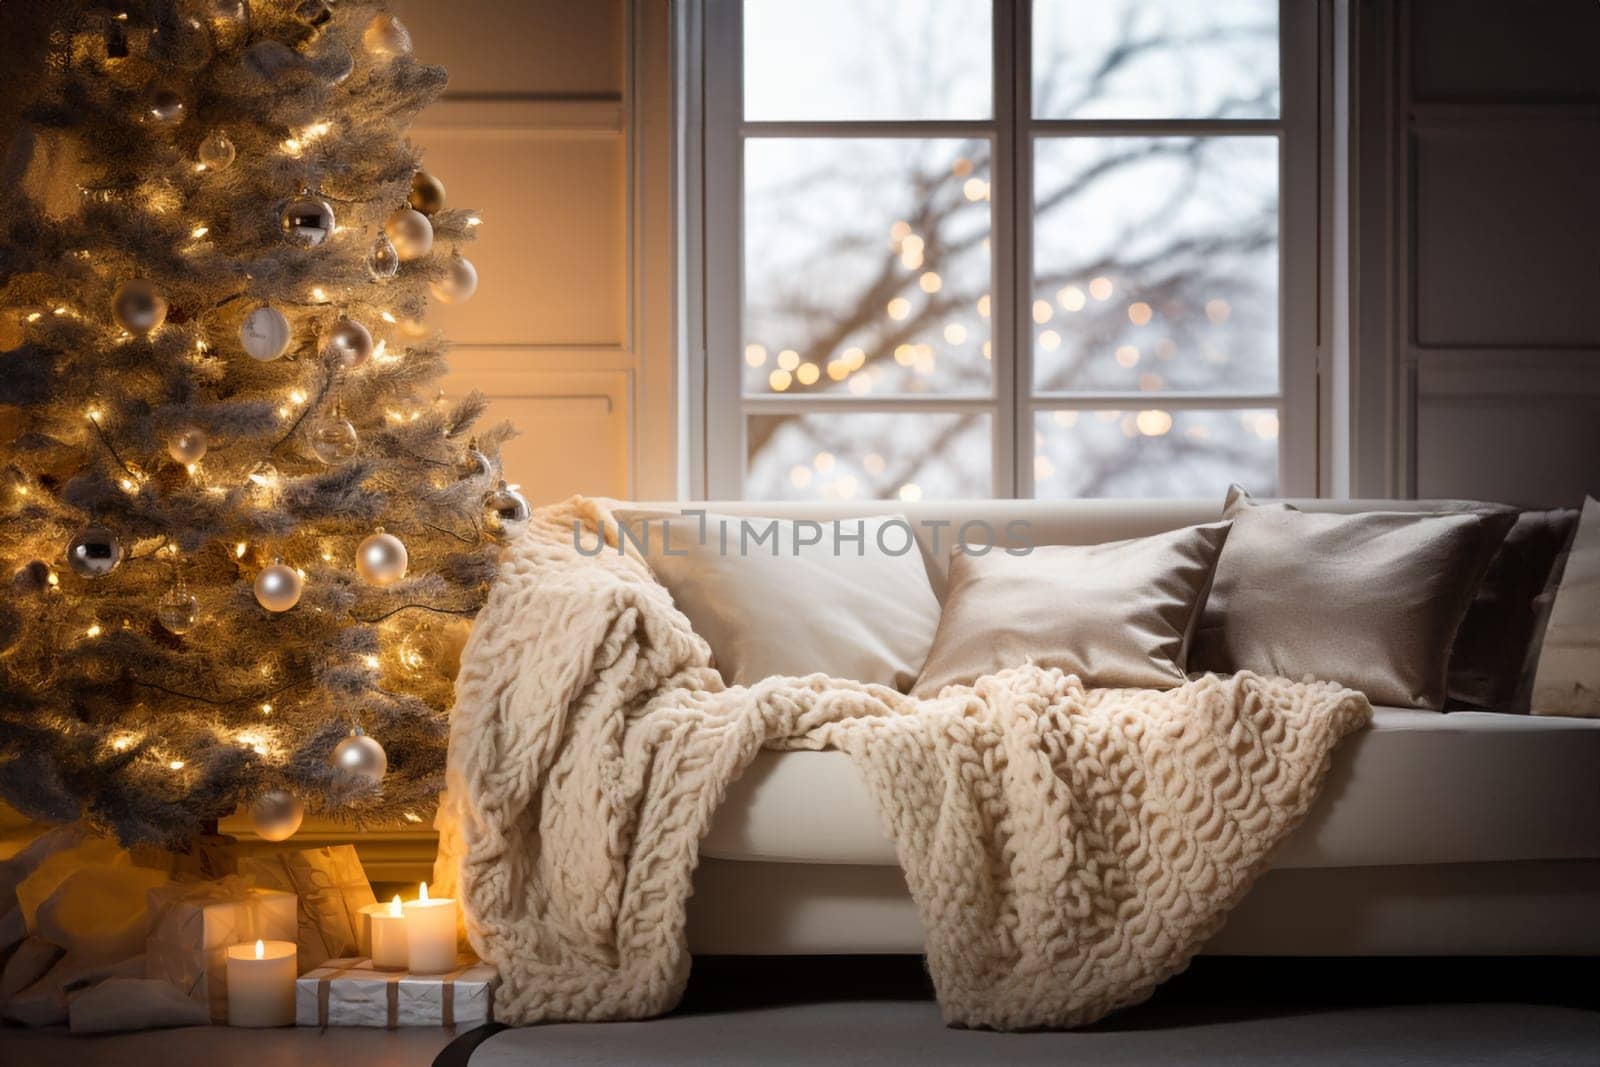 Bright room decorated for Christmas or New Year with a Christmas tree, a sofa with a soft, draped blanket, an illuminated window, and light curtains creating a warm festive atmosphere.